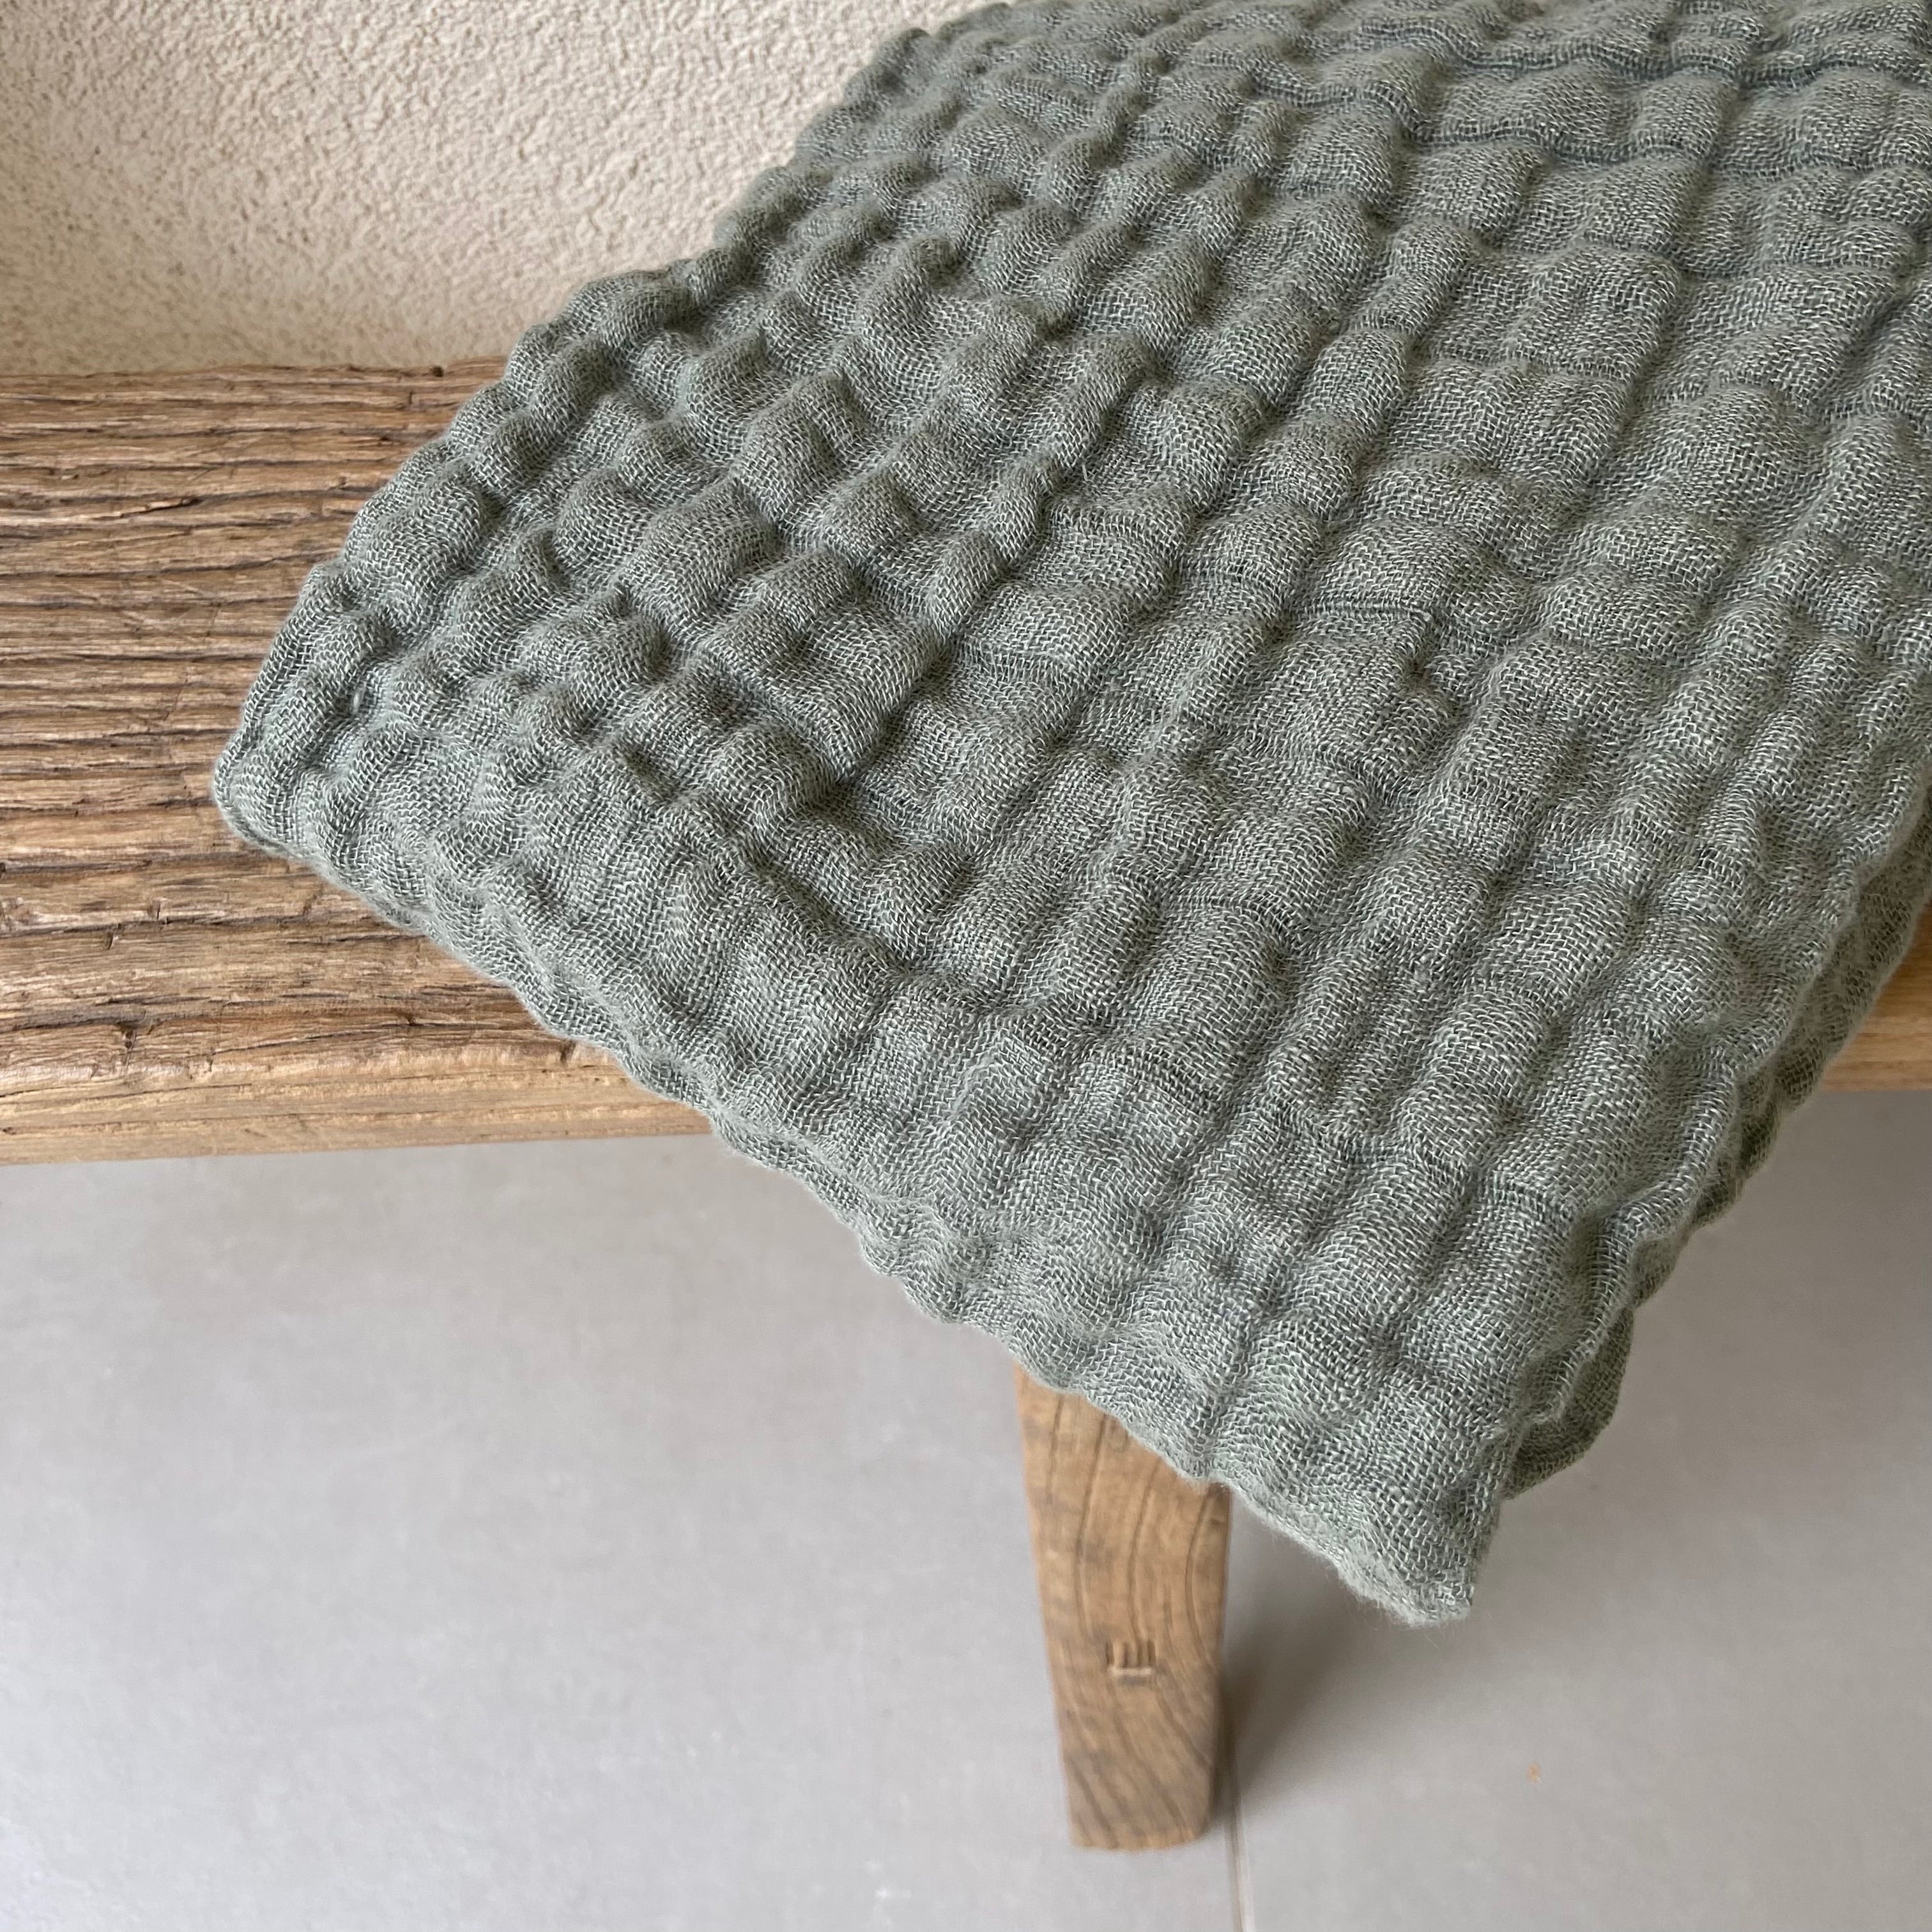 Thick washed linen cheich